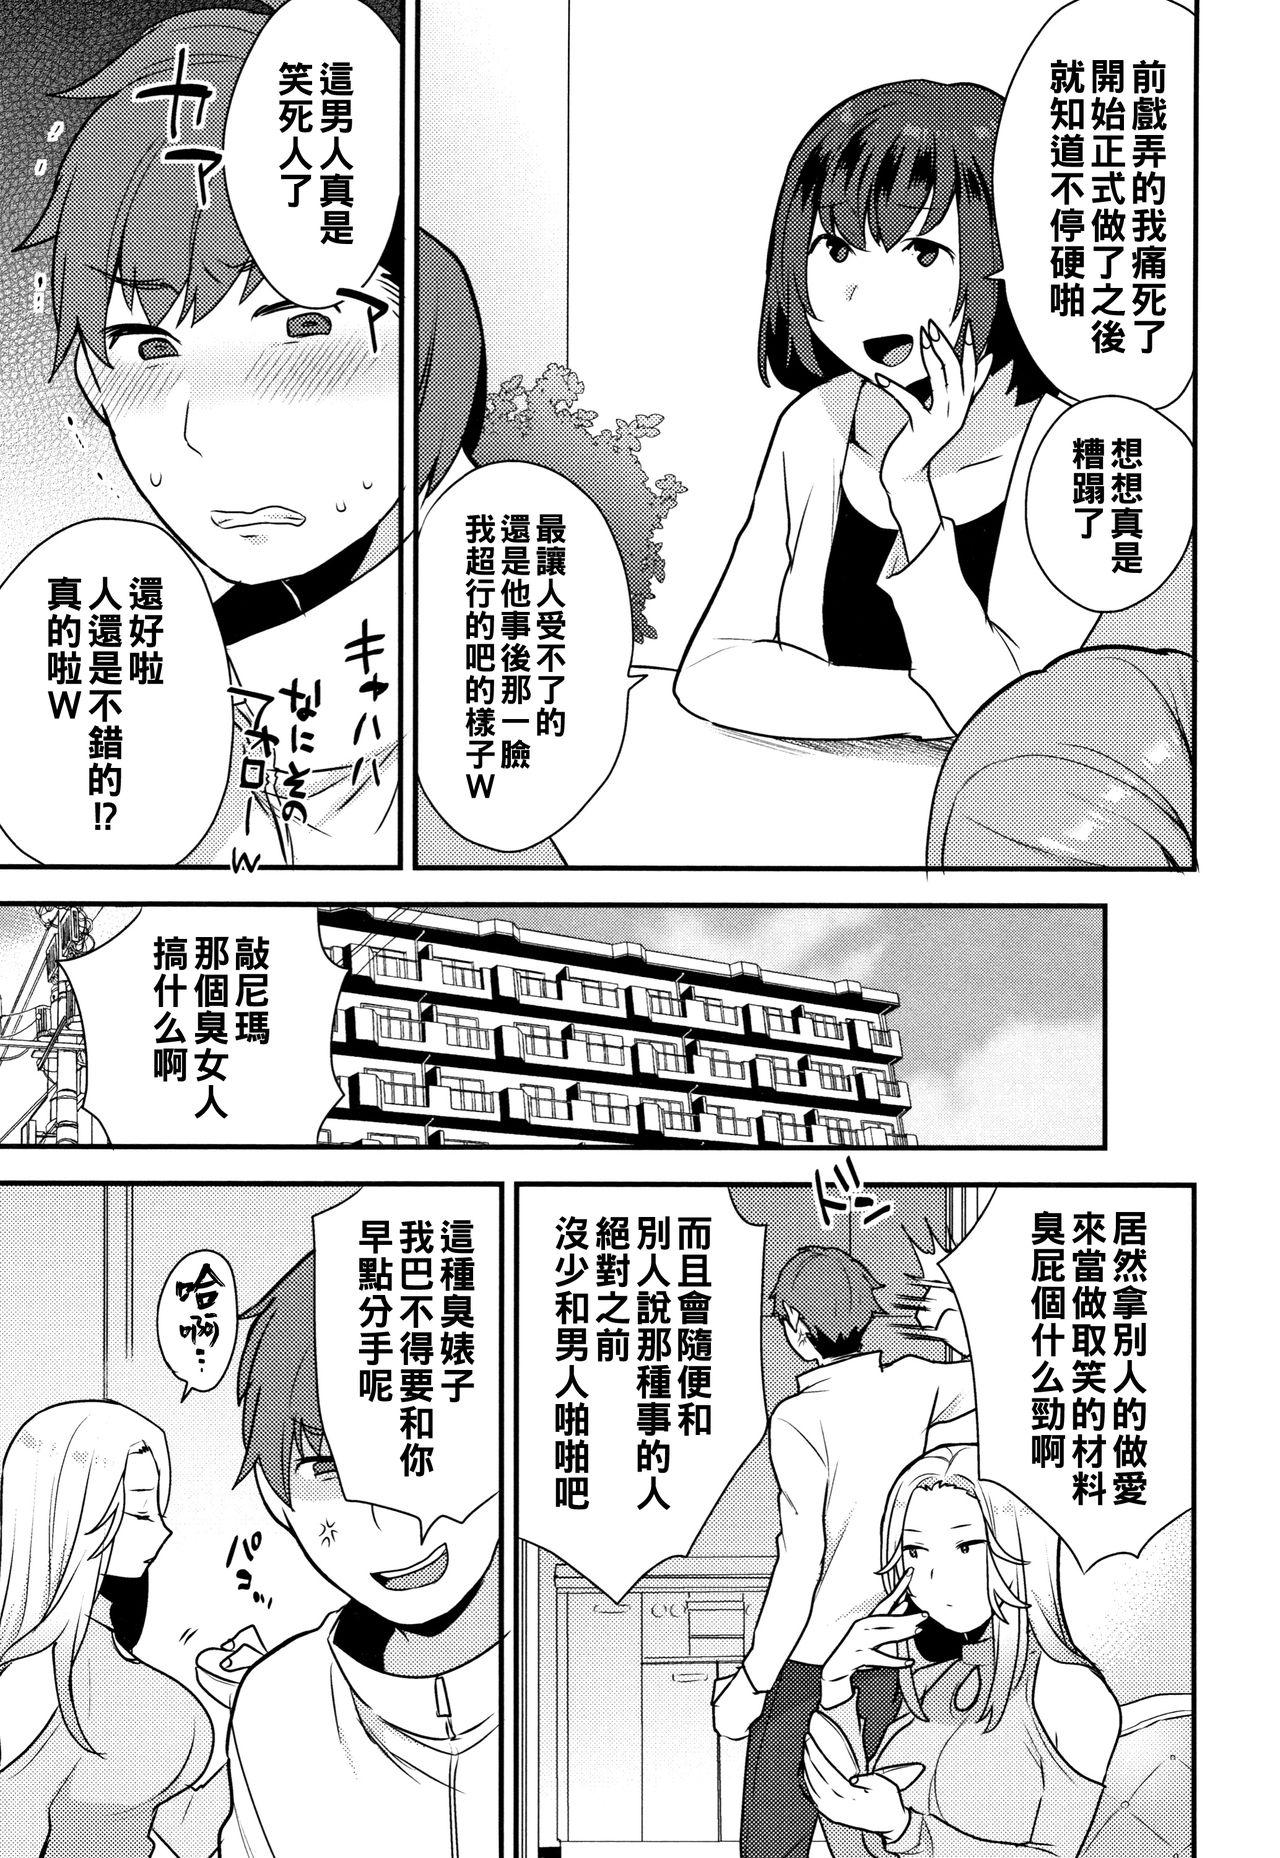 Ass To Mouth 蛙（Chinese） 1080p - Page 7